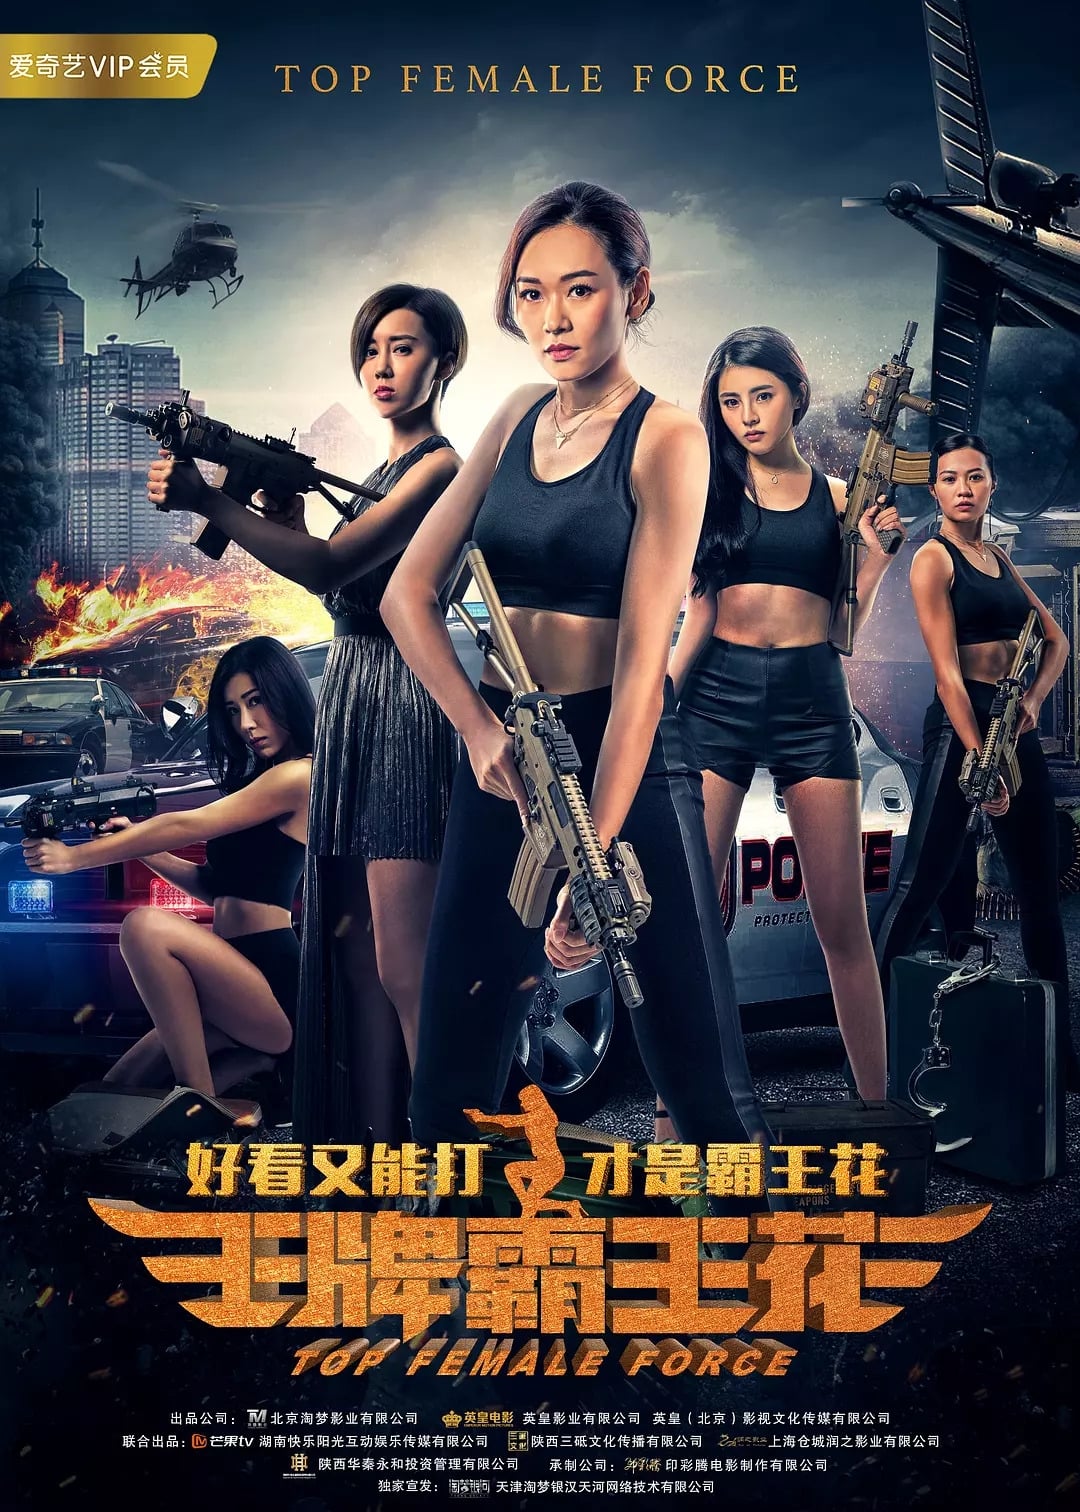 Poster Phim Hoa Acemaster (Top Female Force)